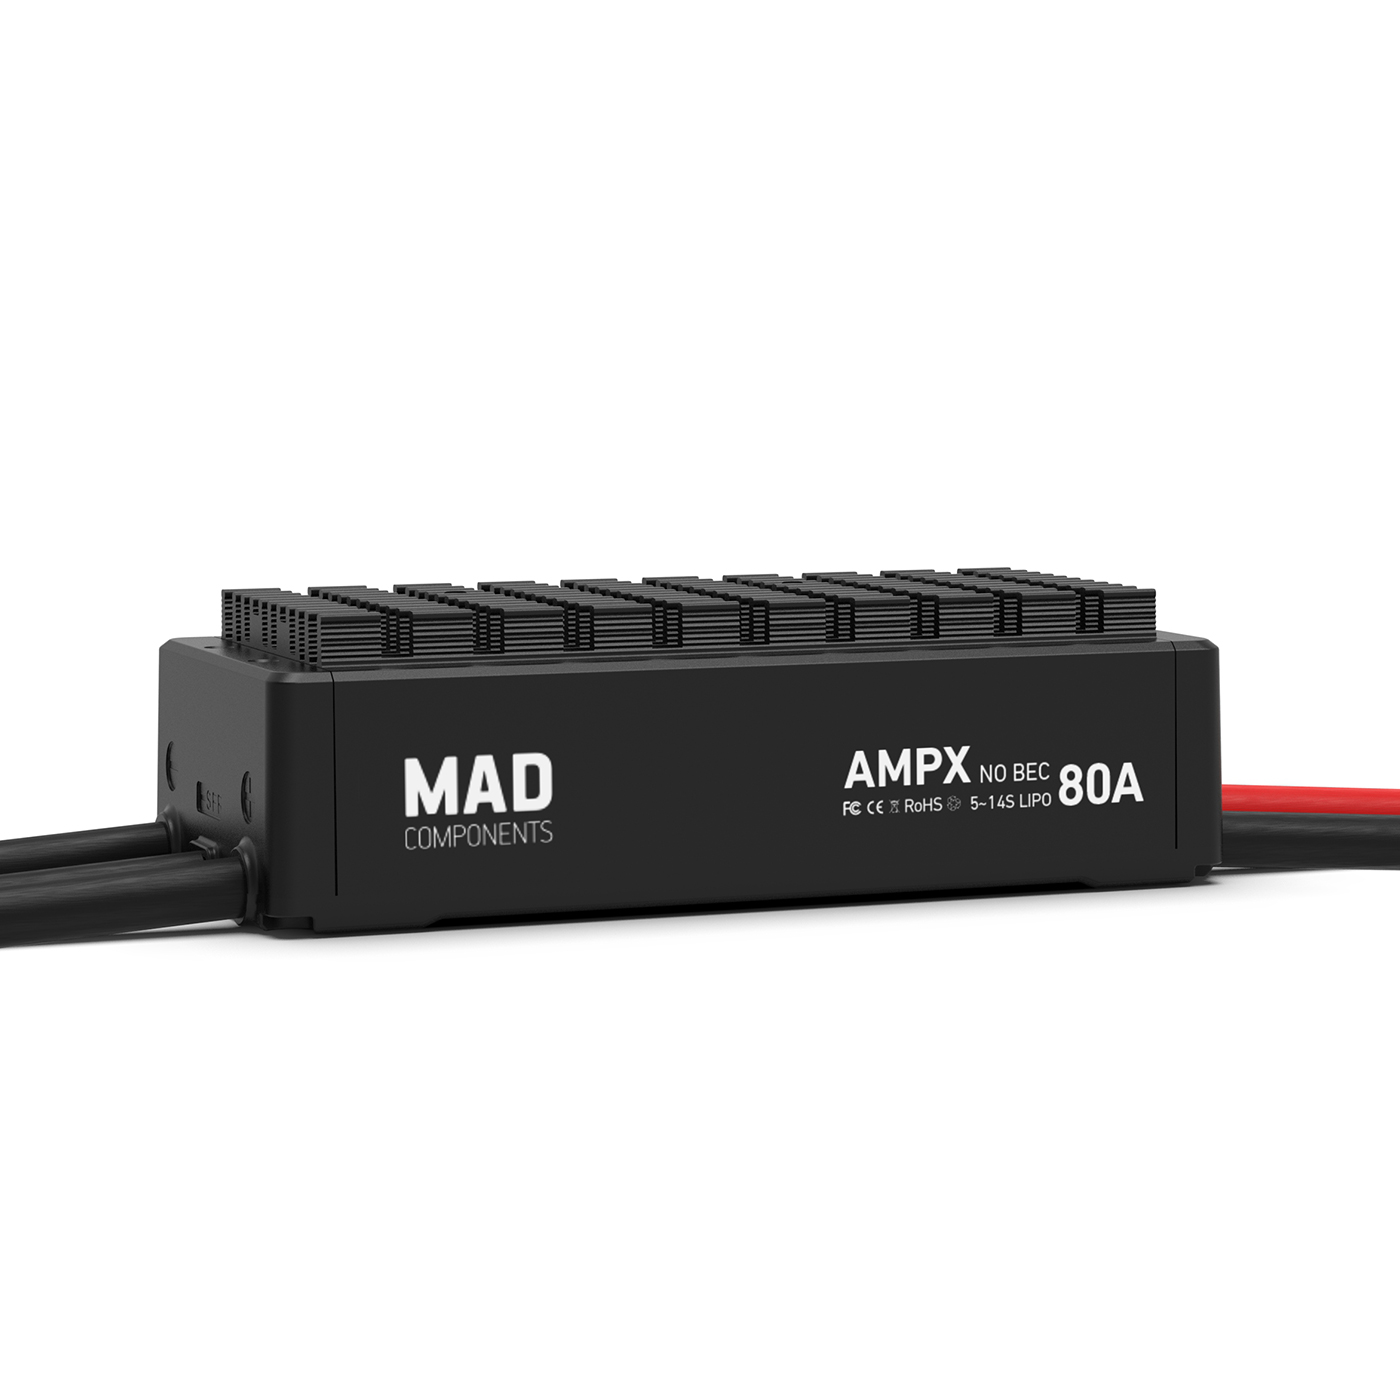 MAD AMPX  80A (5-14S) ESC brushless motor controller for the multirotor drone aircraft heaxcopter quadcopter octocopter